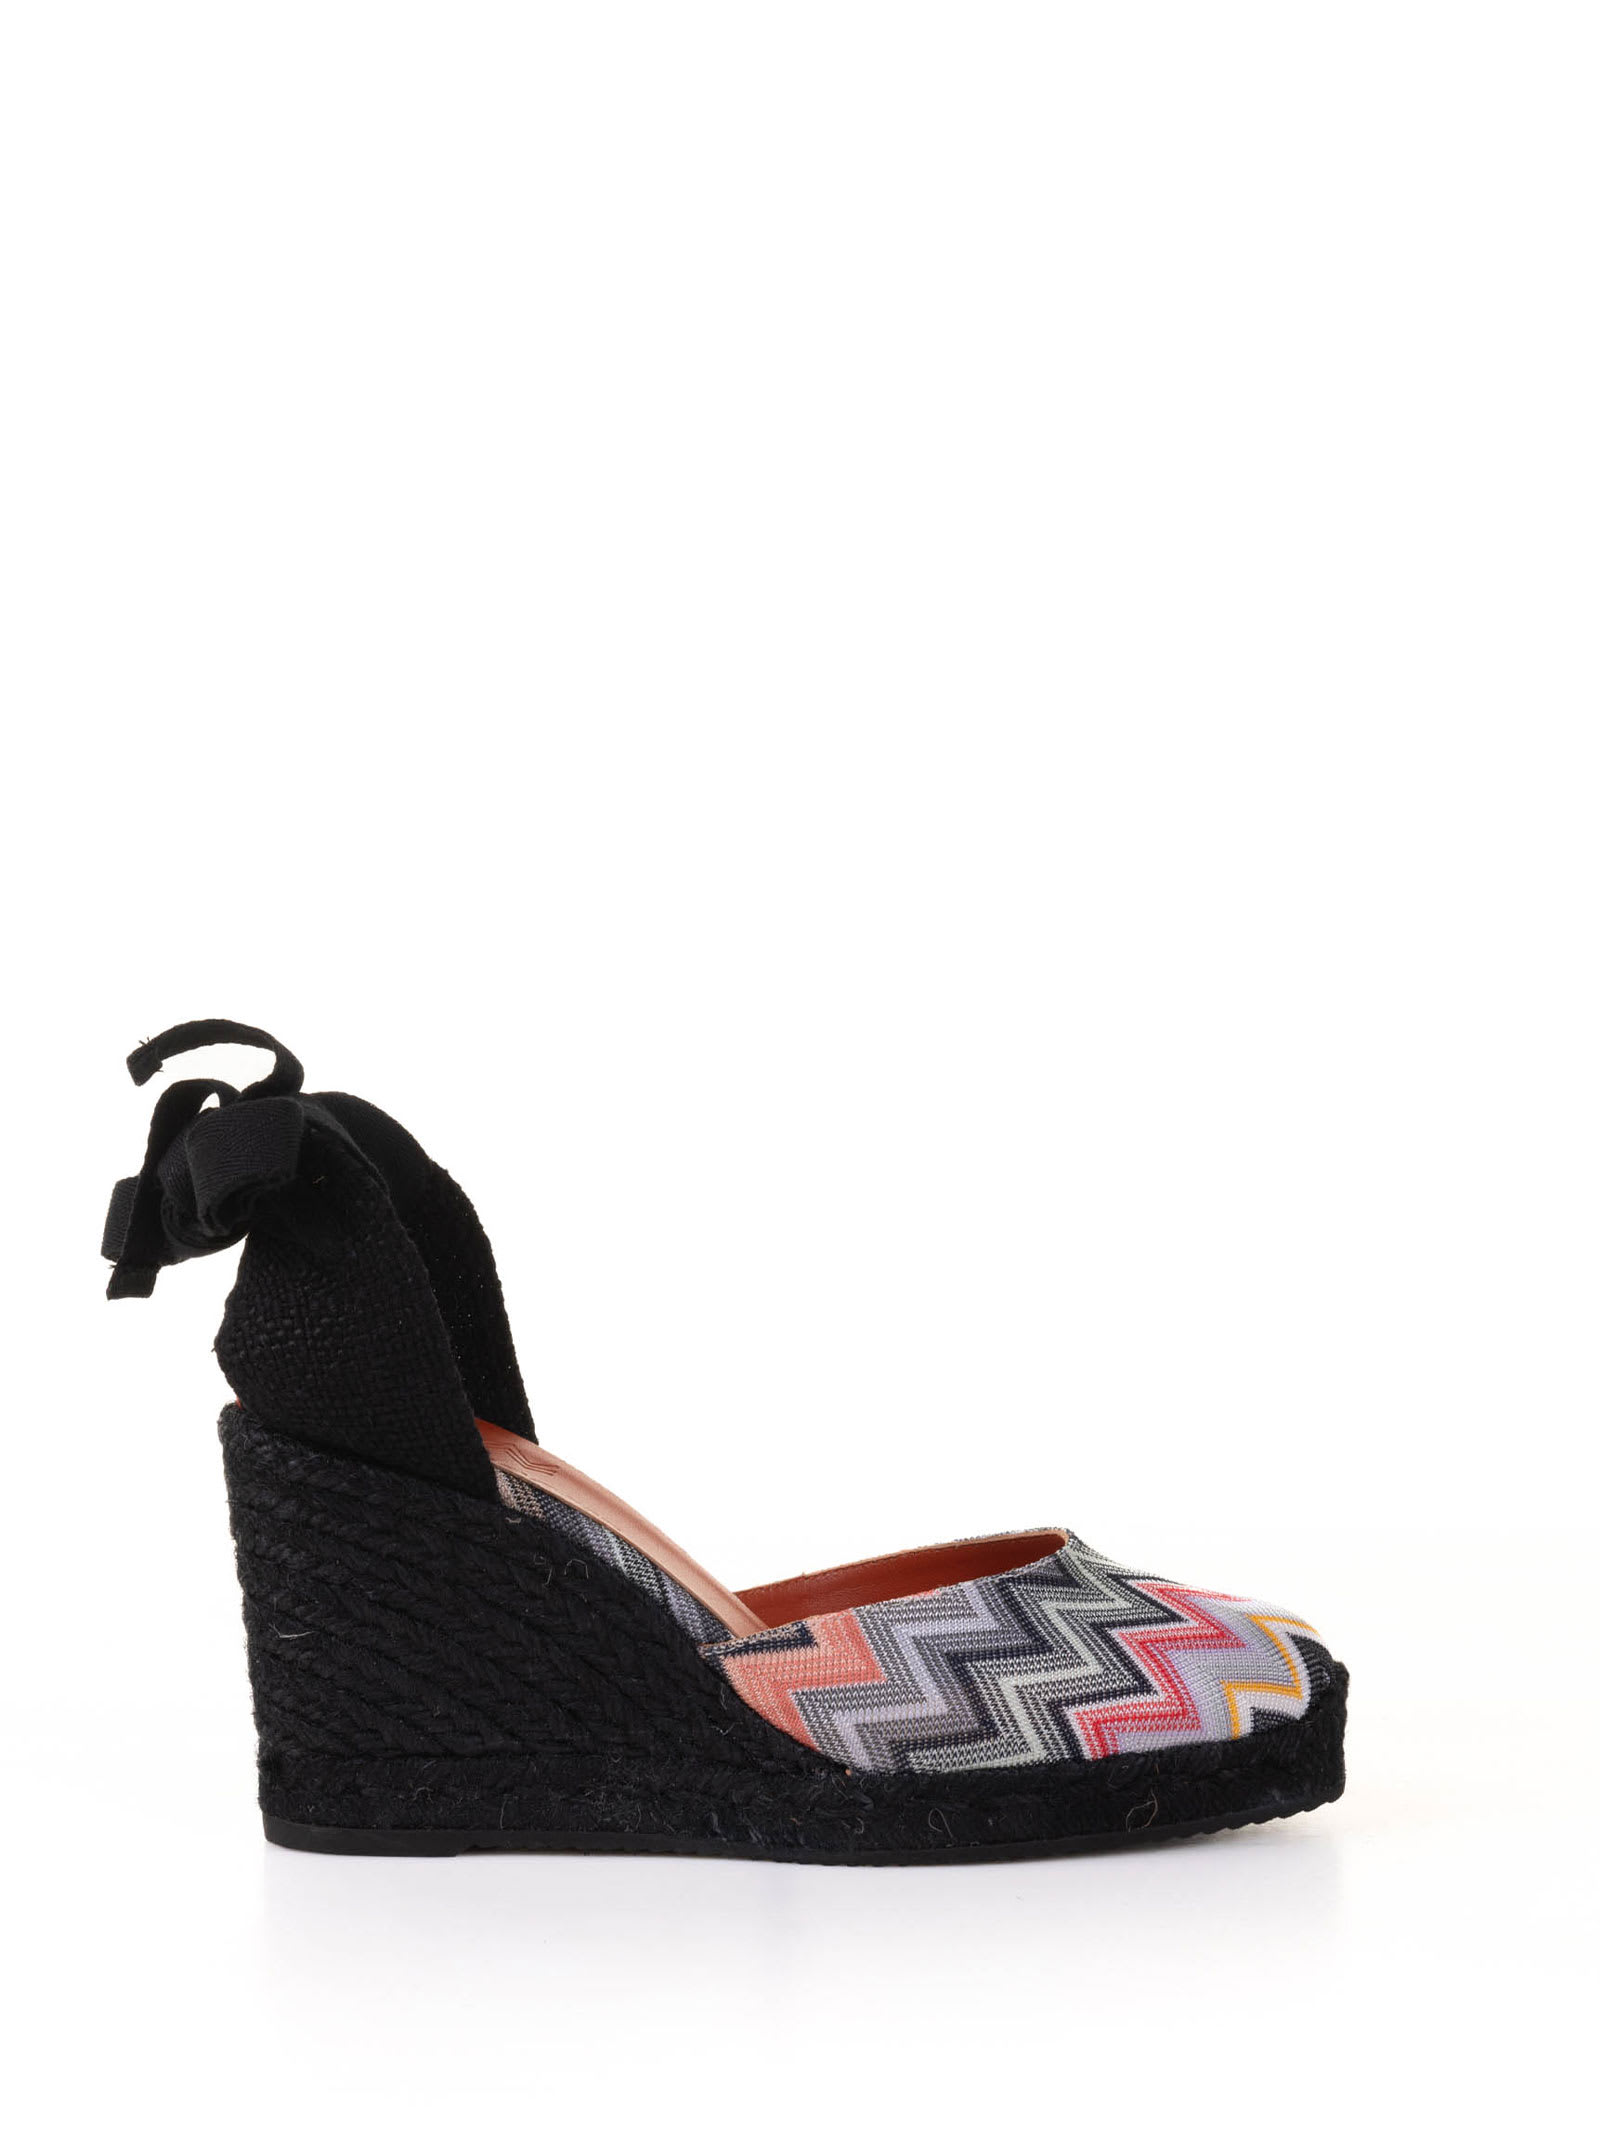 Espadrilles In Chevron Fabric With Wedge And Ankle Laces